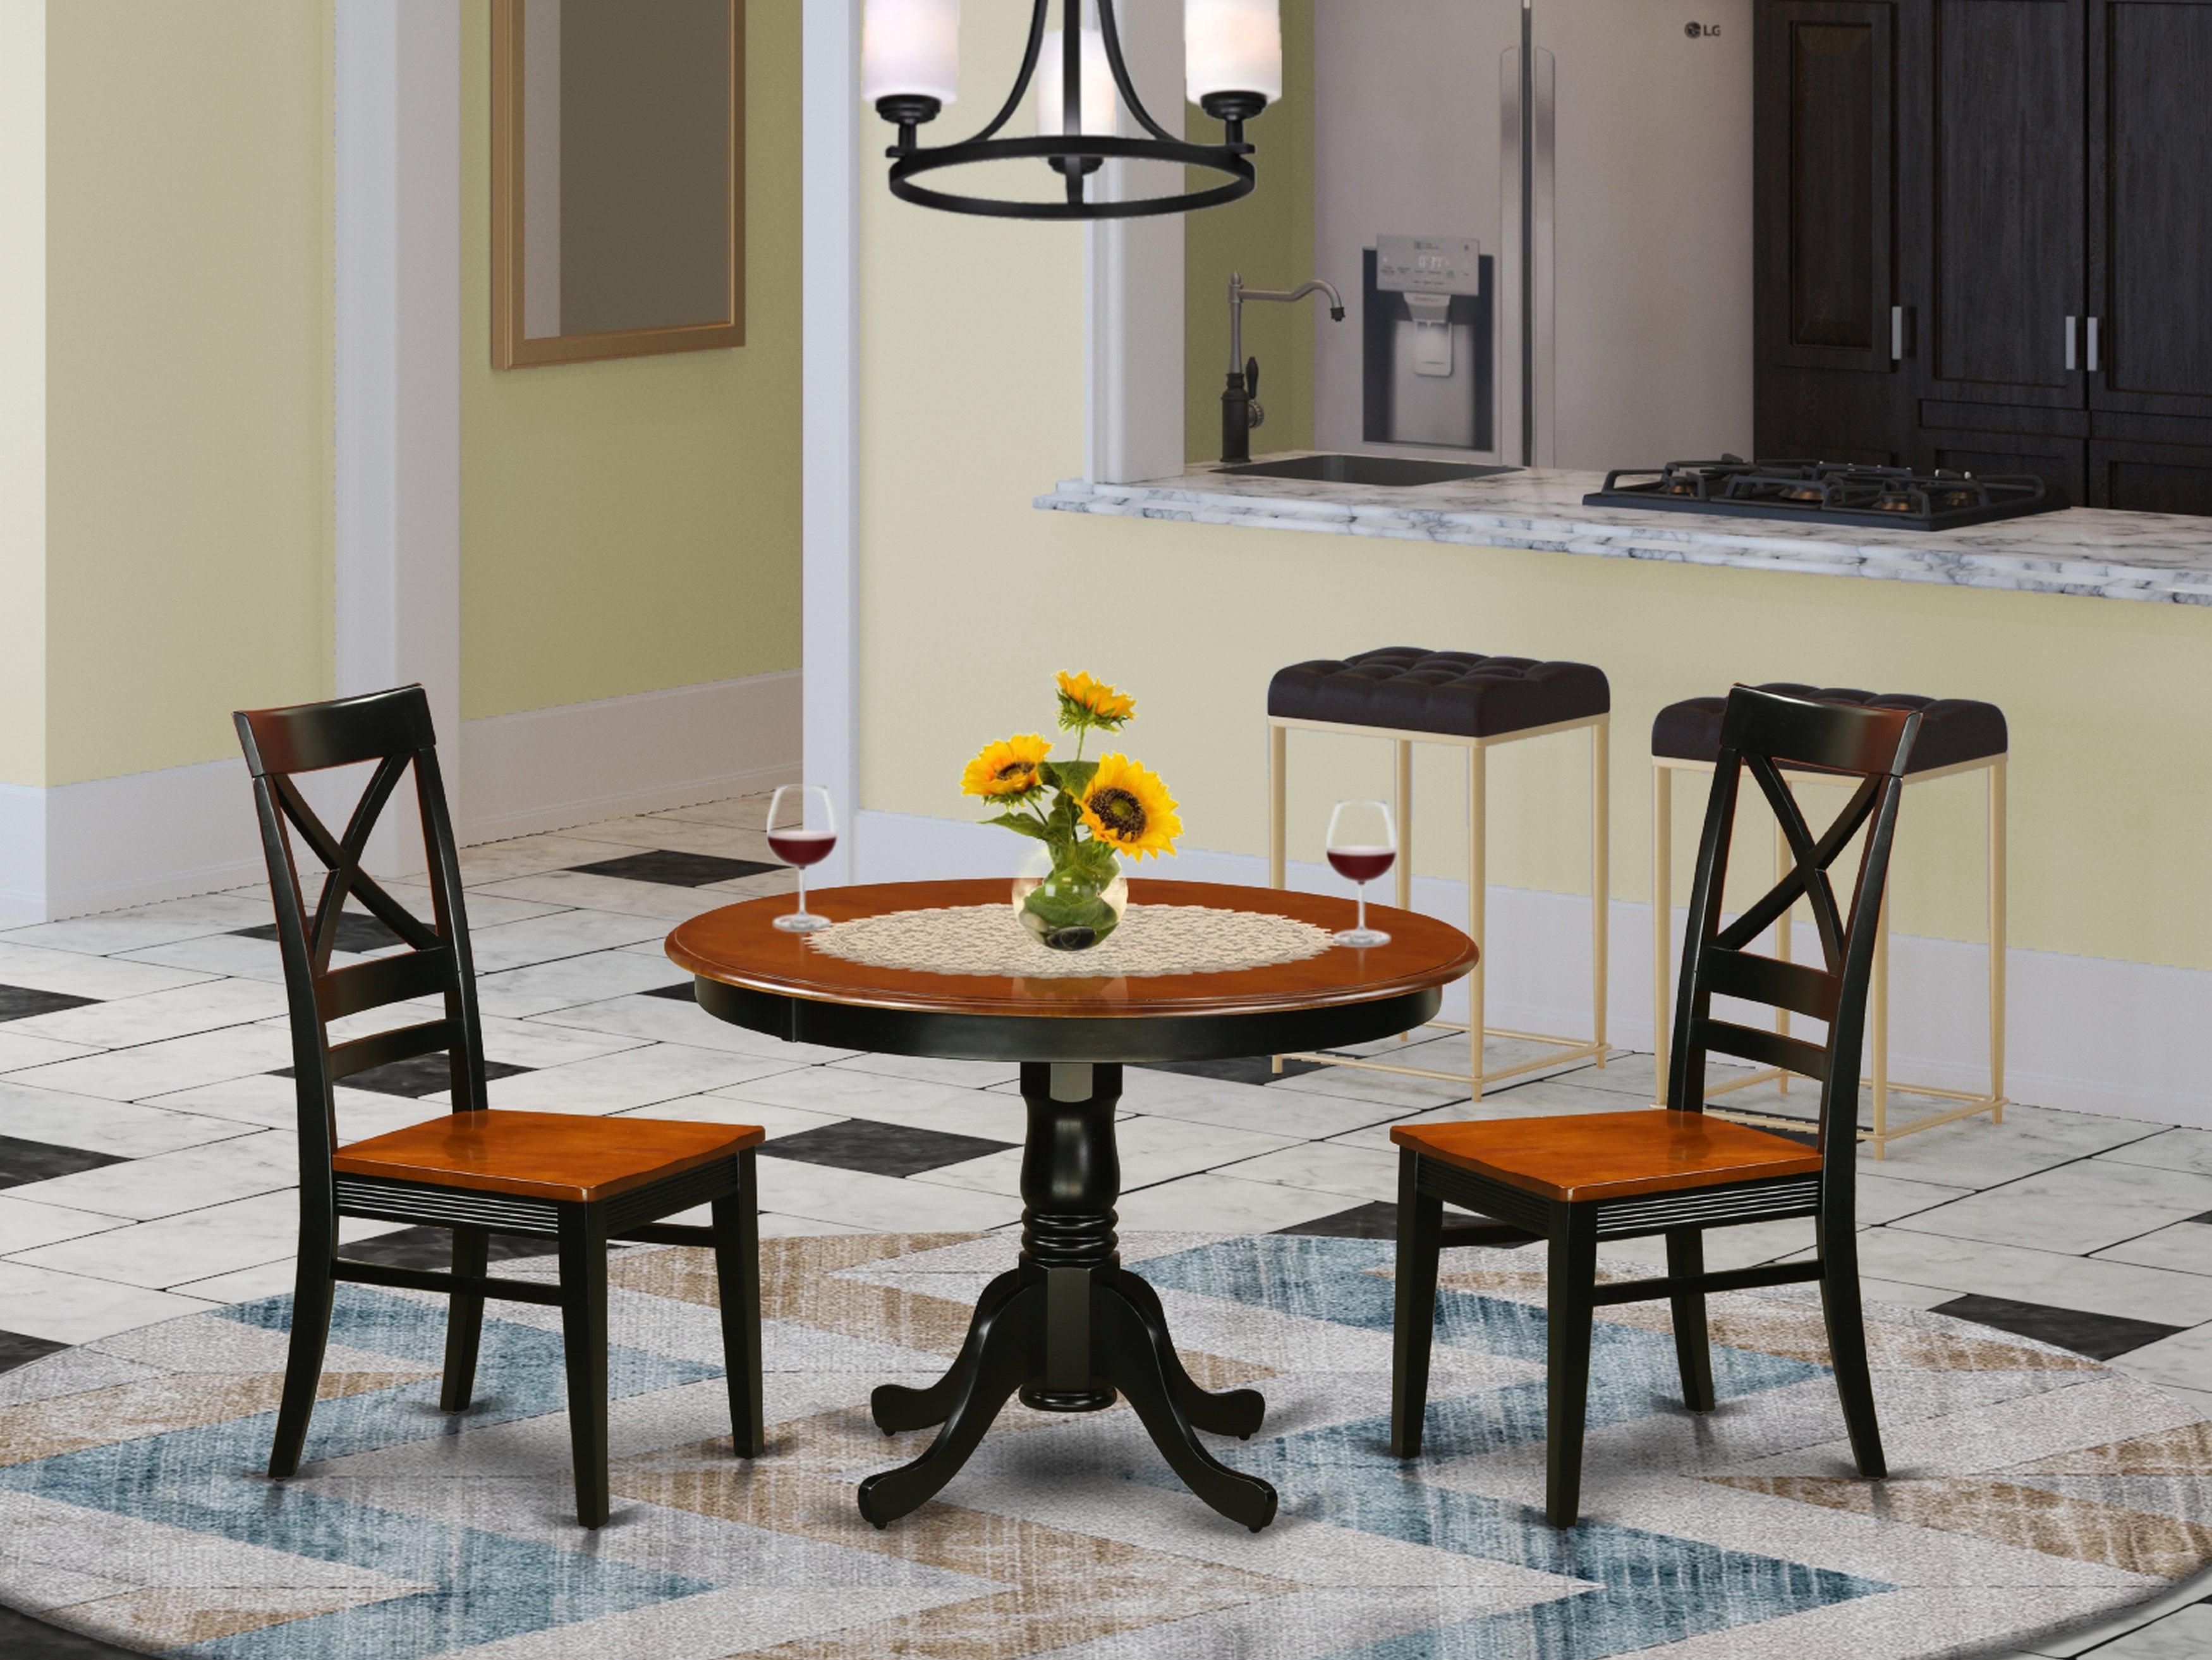 HLQU3-BCH-W 3 Pc set with a Round Dinette Table and 2 Leather Kitchen Chairs in Black and Cherry